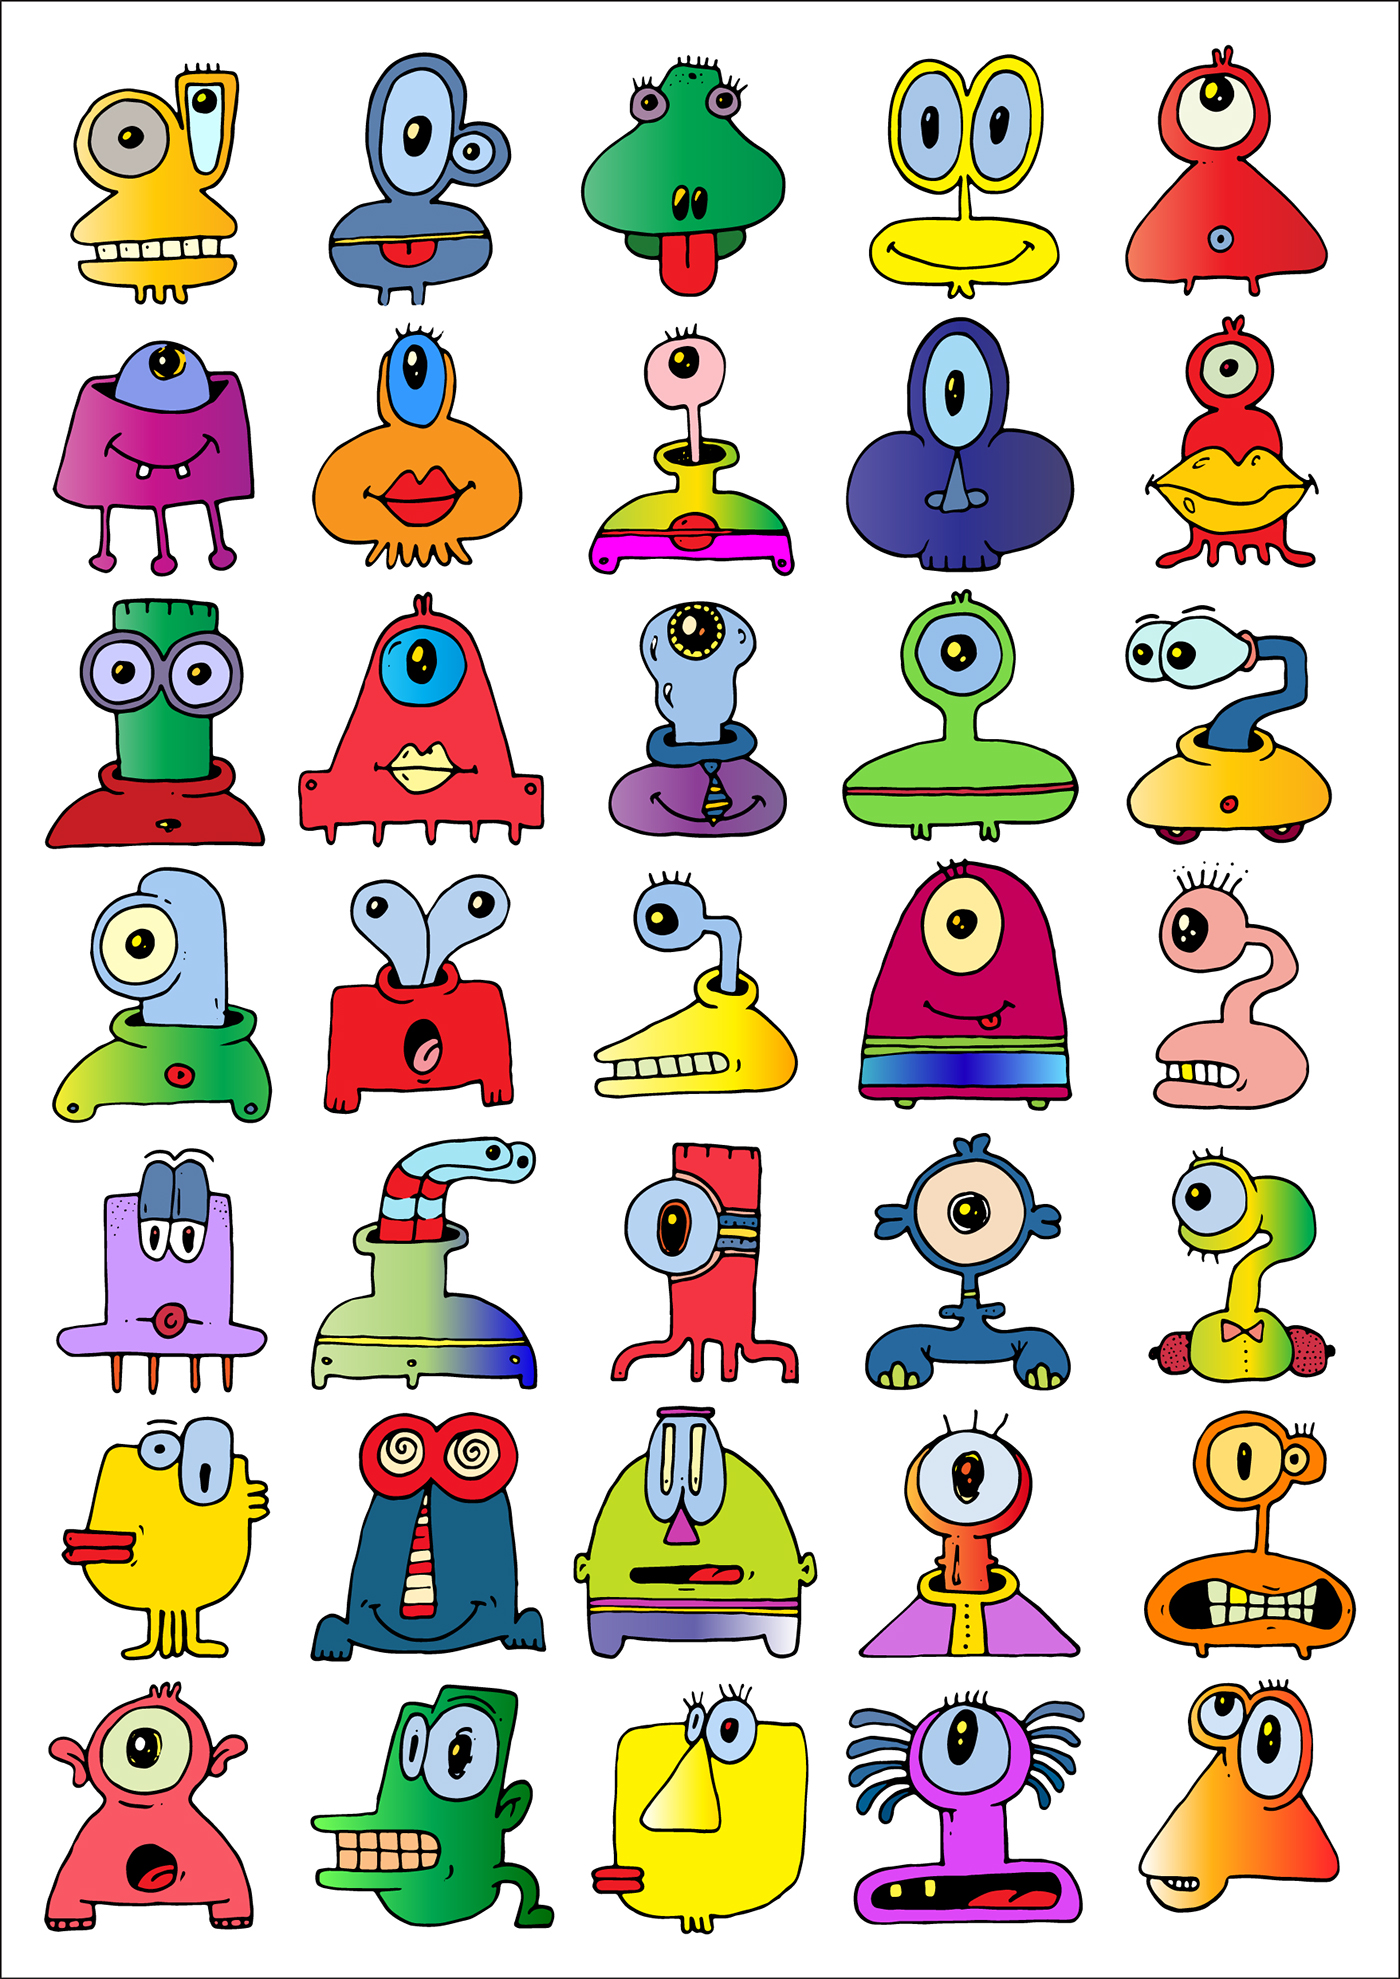 monste  alien creature strange funny colorful silly icons cute cool